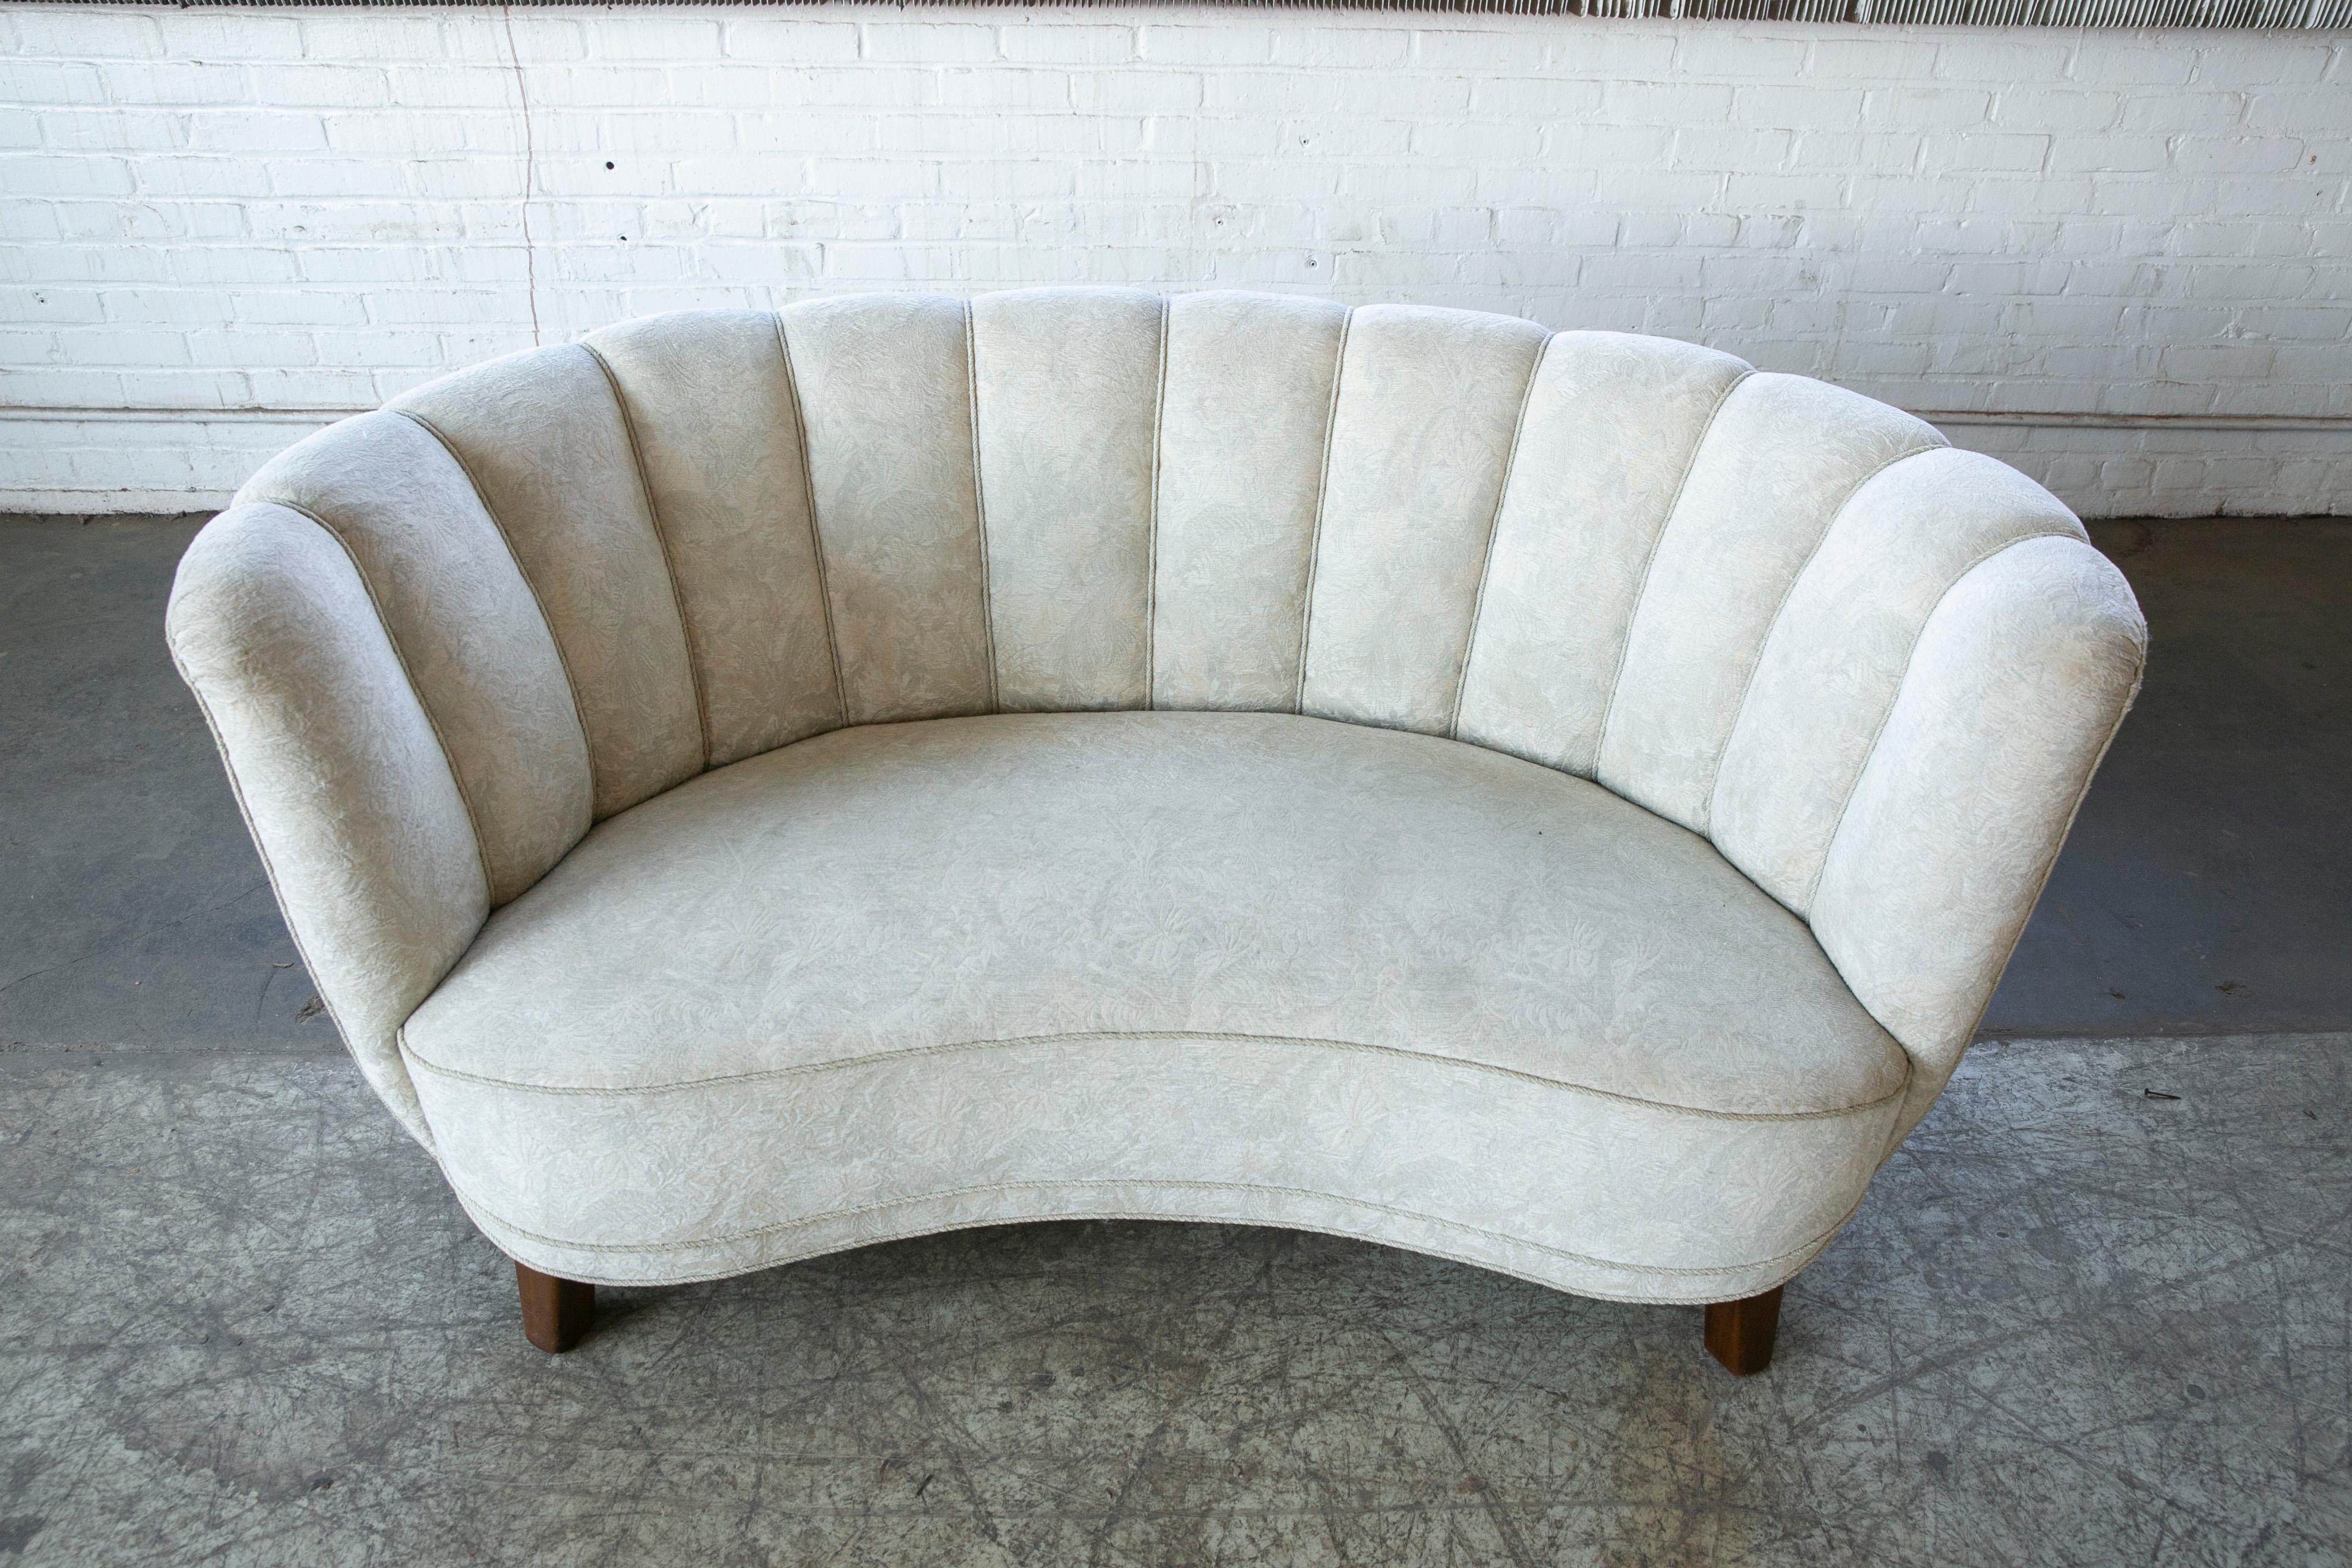 Danish 1940s Curved Banana Shape Loveseat in White Wool with Channel in Backrest In Good Condition For Sale In Bridgeport, CT